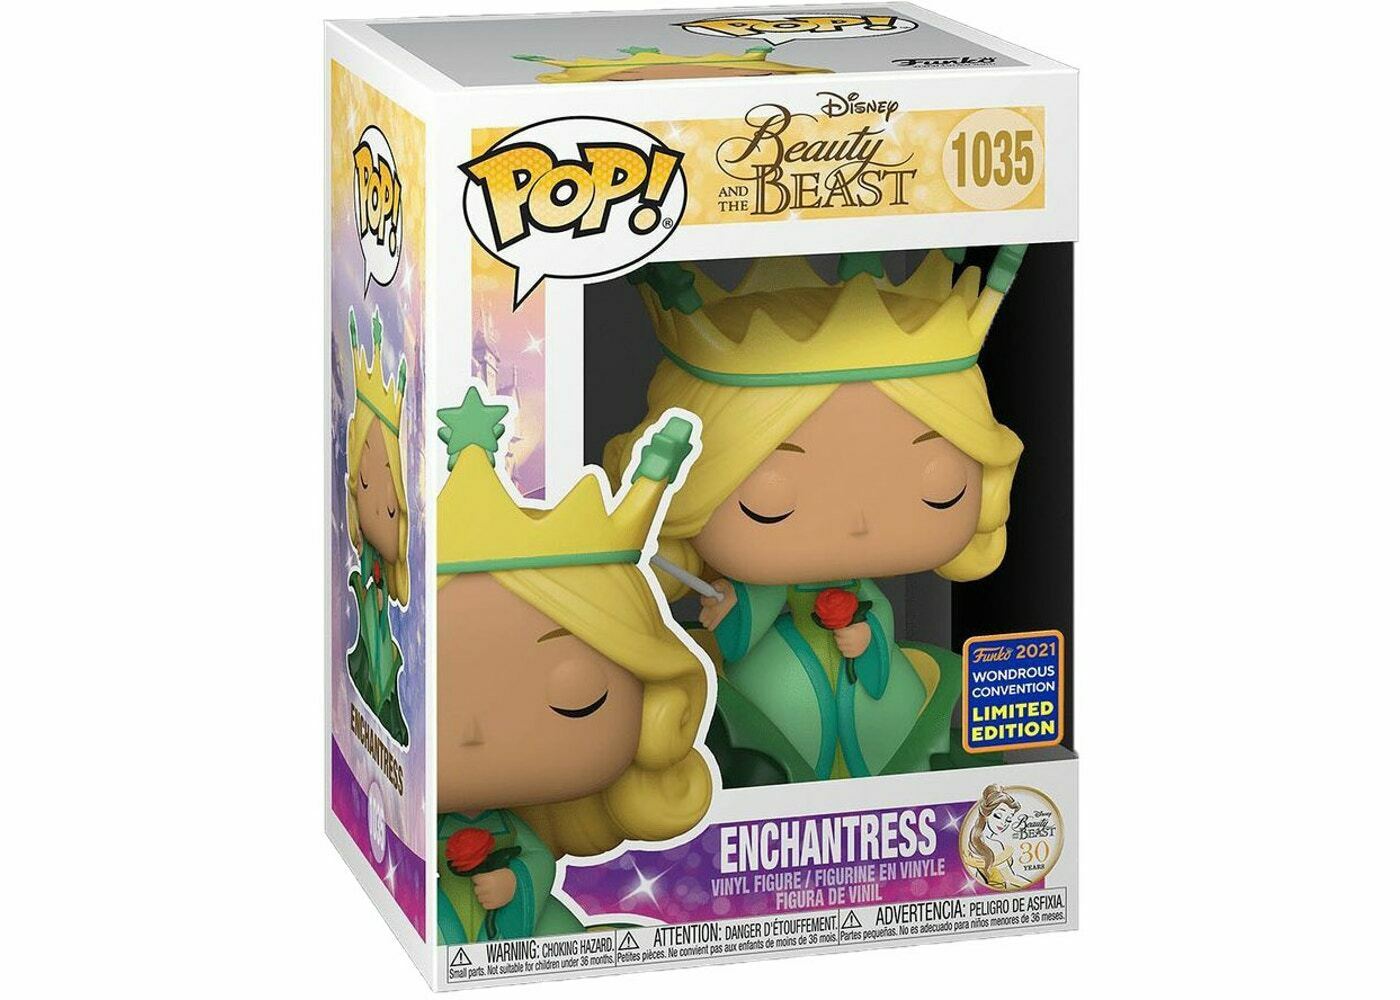 Enchantress #1035 Funko Pop! Beauty & The Beast - 2021 Wondercon Limited Edition - Angry Cat